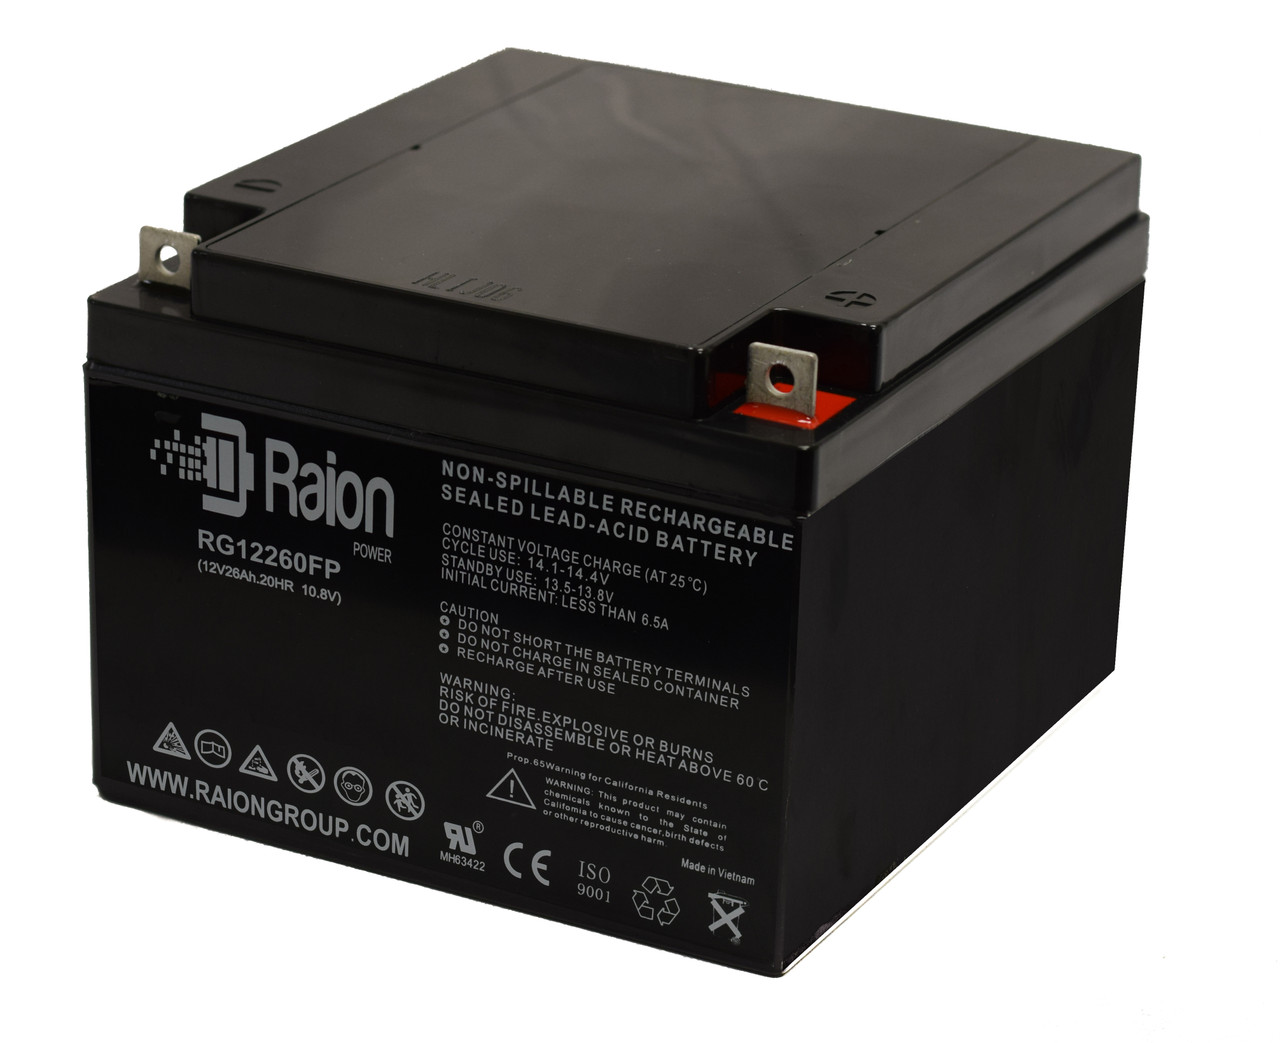 Raion Power Replacement 12V 26Ah Battery for Jasco RB12260-F2 - 1 Pack